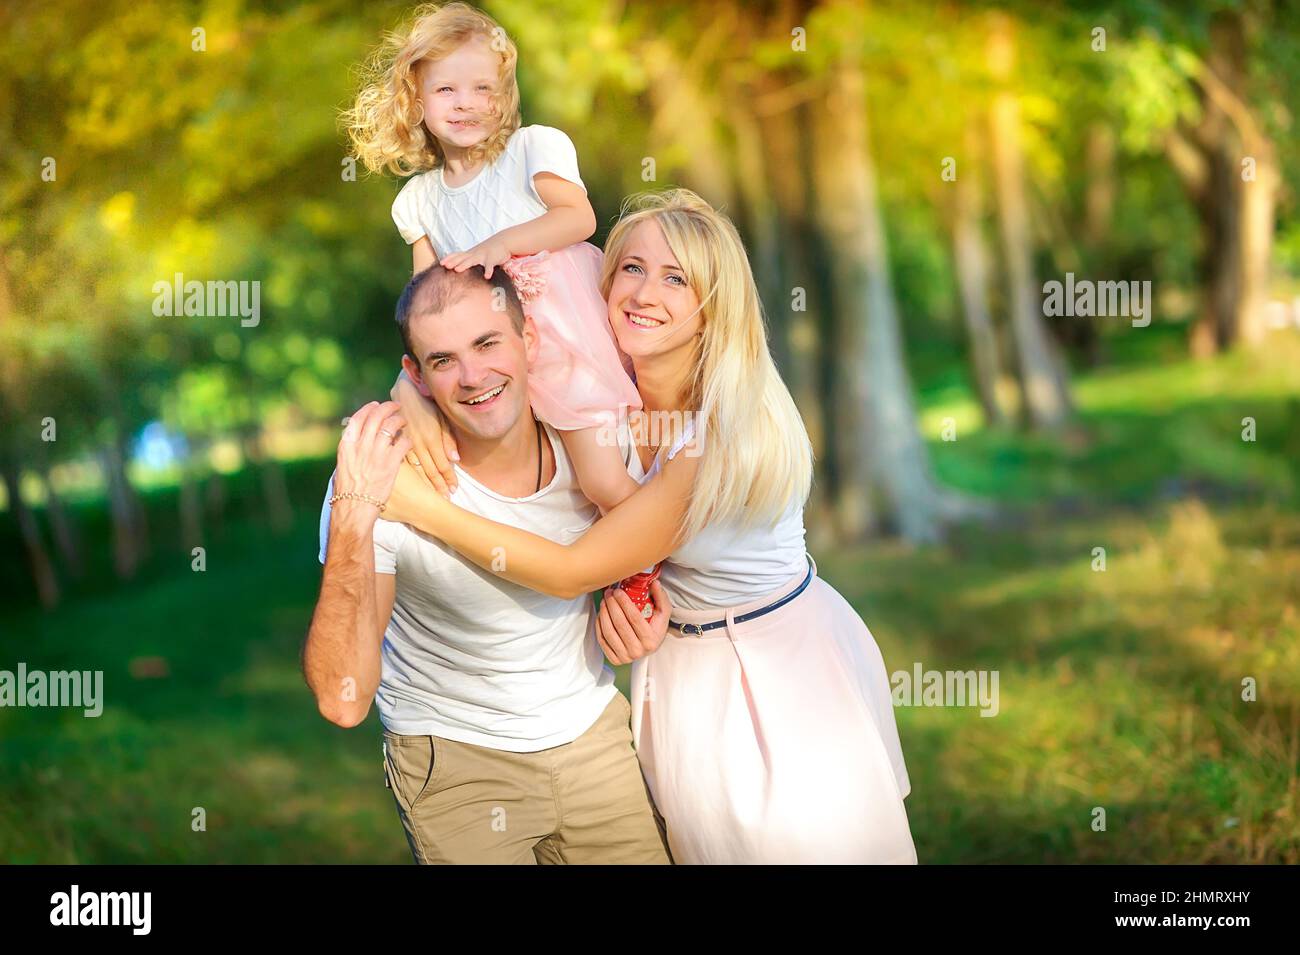 Happy family in a beautiful spring park, daughter around dad's neck, healthy outdoor recreation Stock Photo